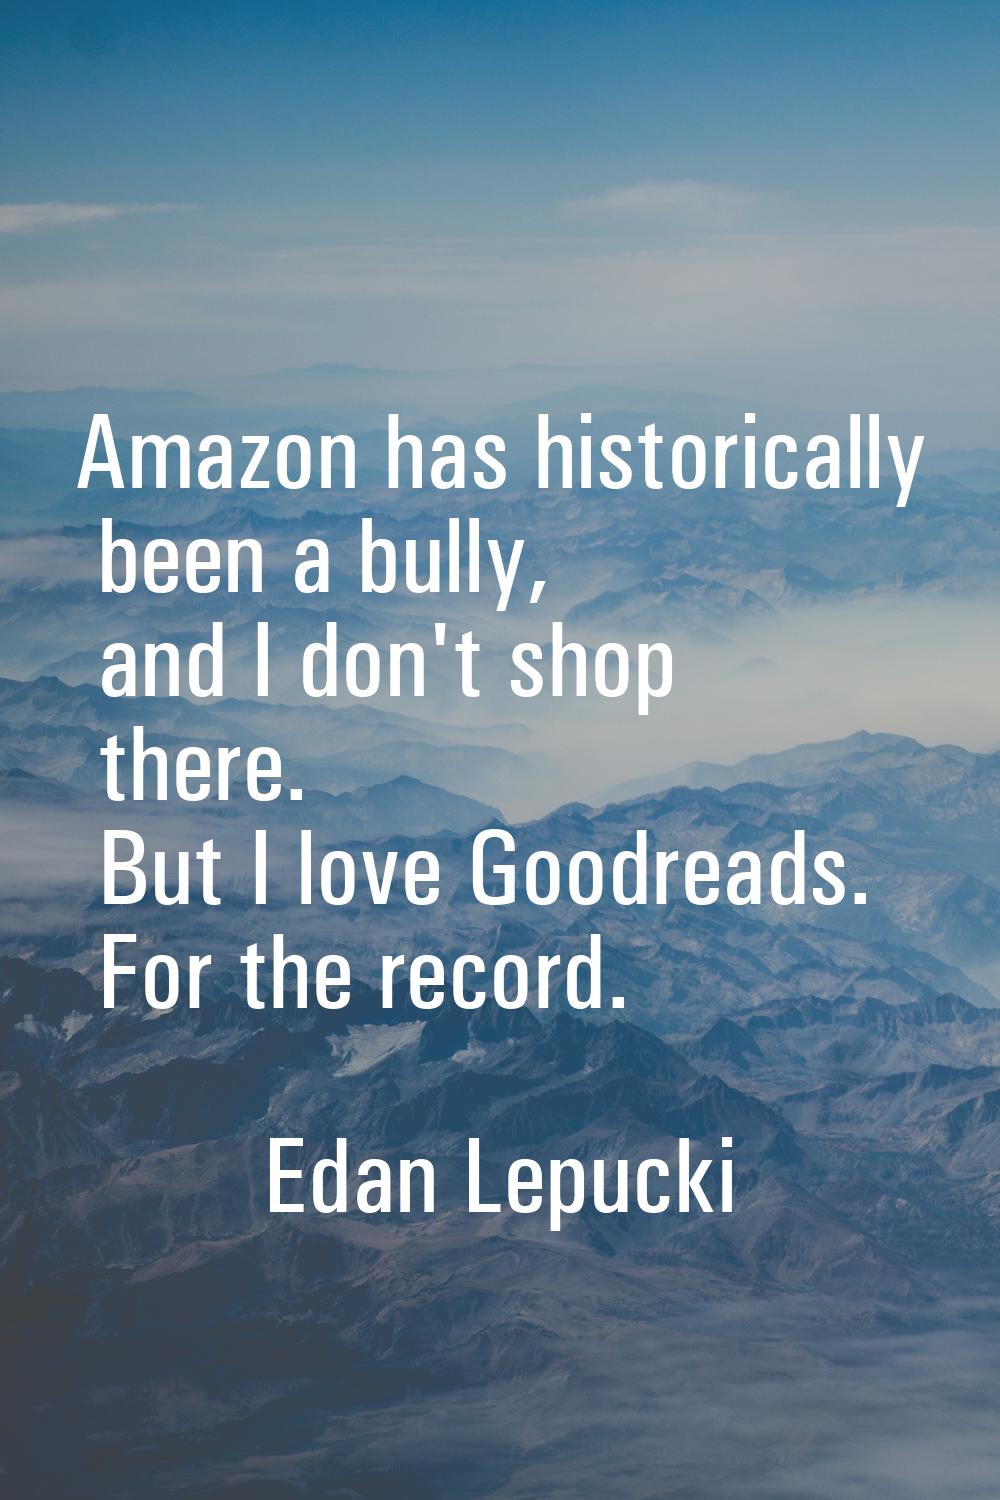 Amazon has historically been a bully, and I don't shop there. But I love Goodreads. For the record.